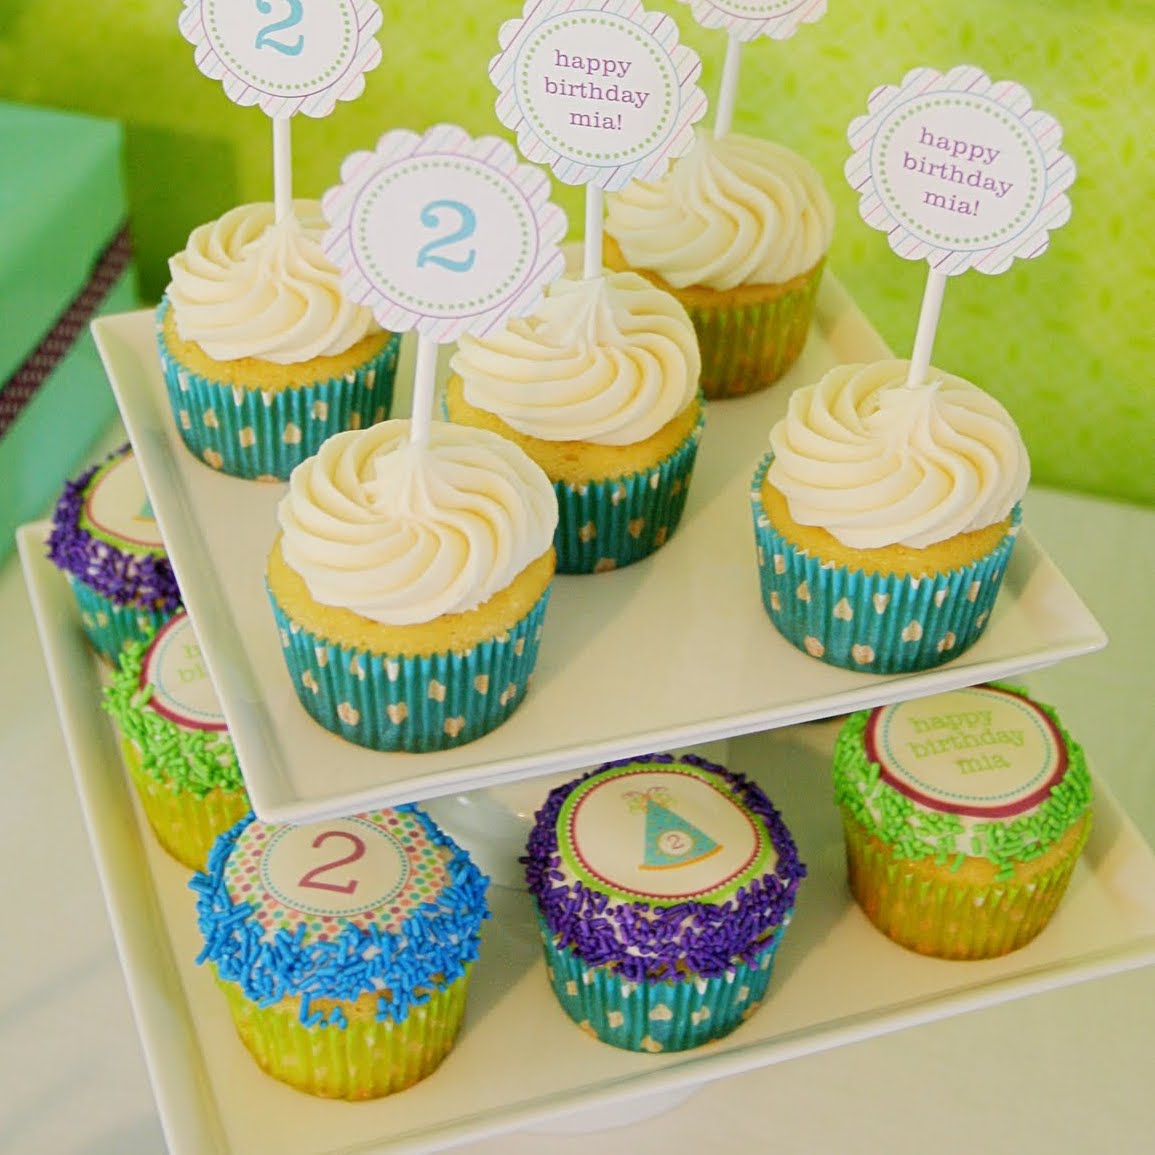 create your own edible cupcake toppers with custom photo, text, artwork design or logo